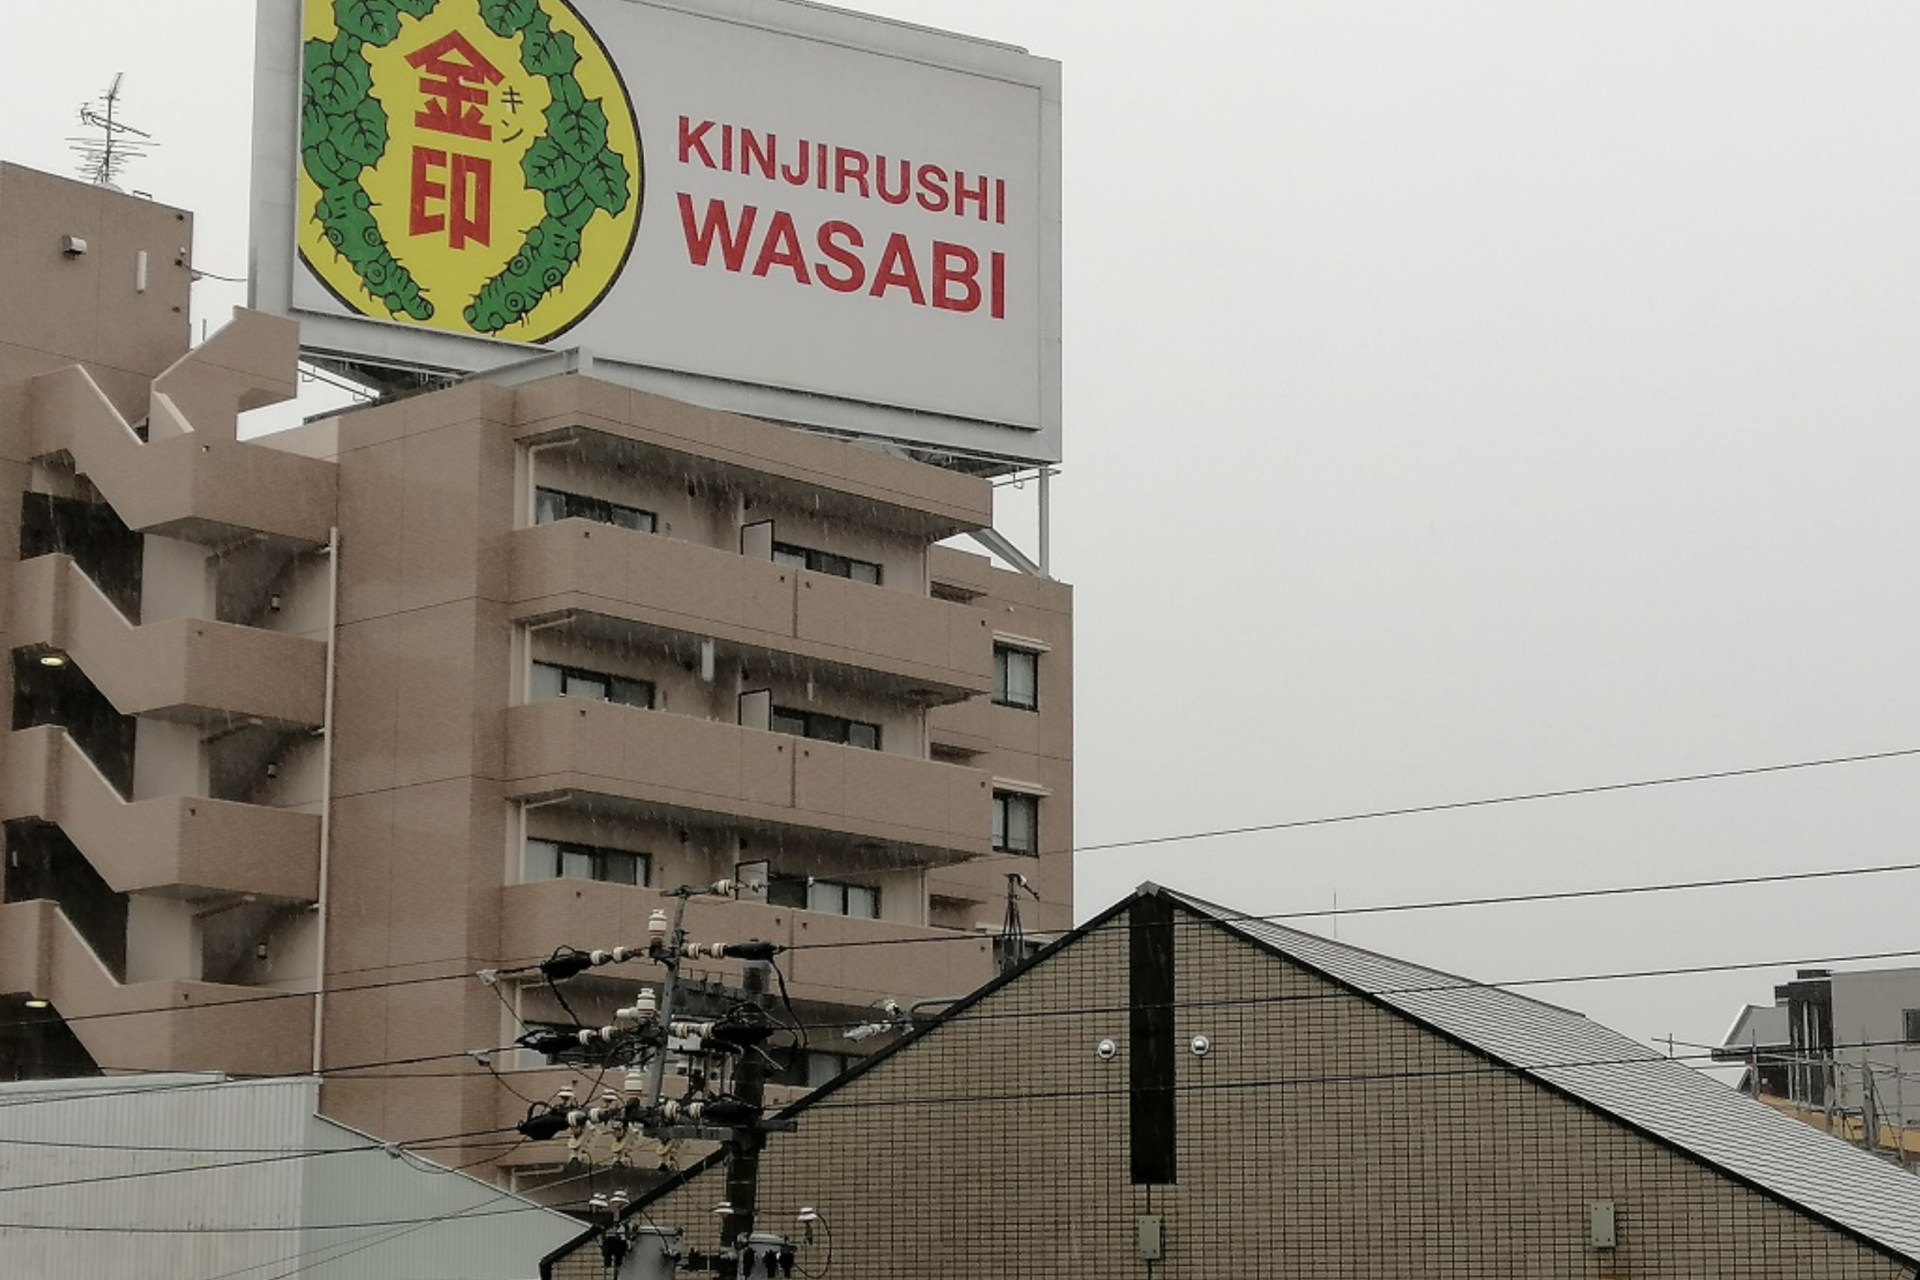 Conducted in cooperation with a wasabi manufacturer 